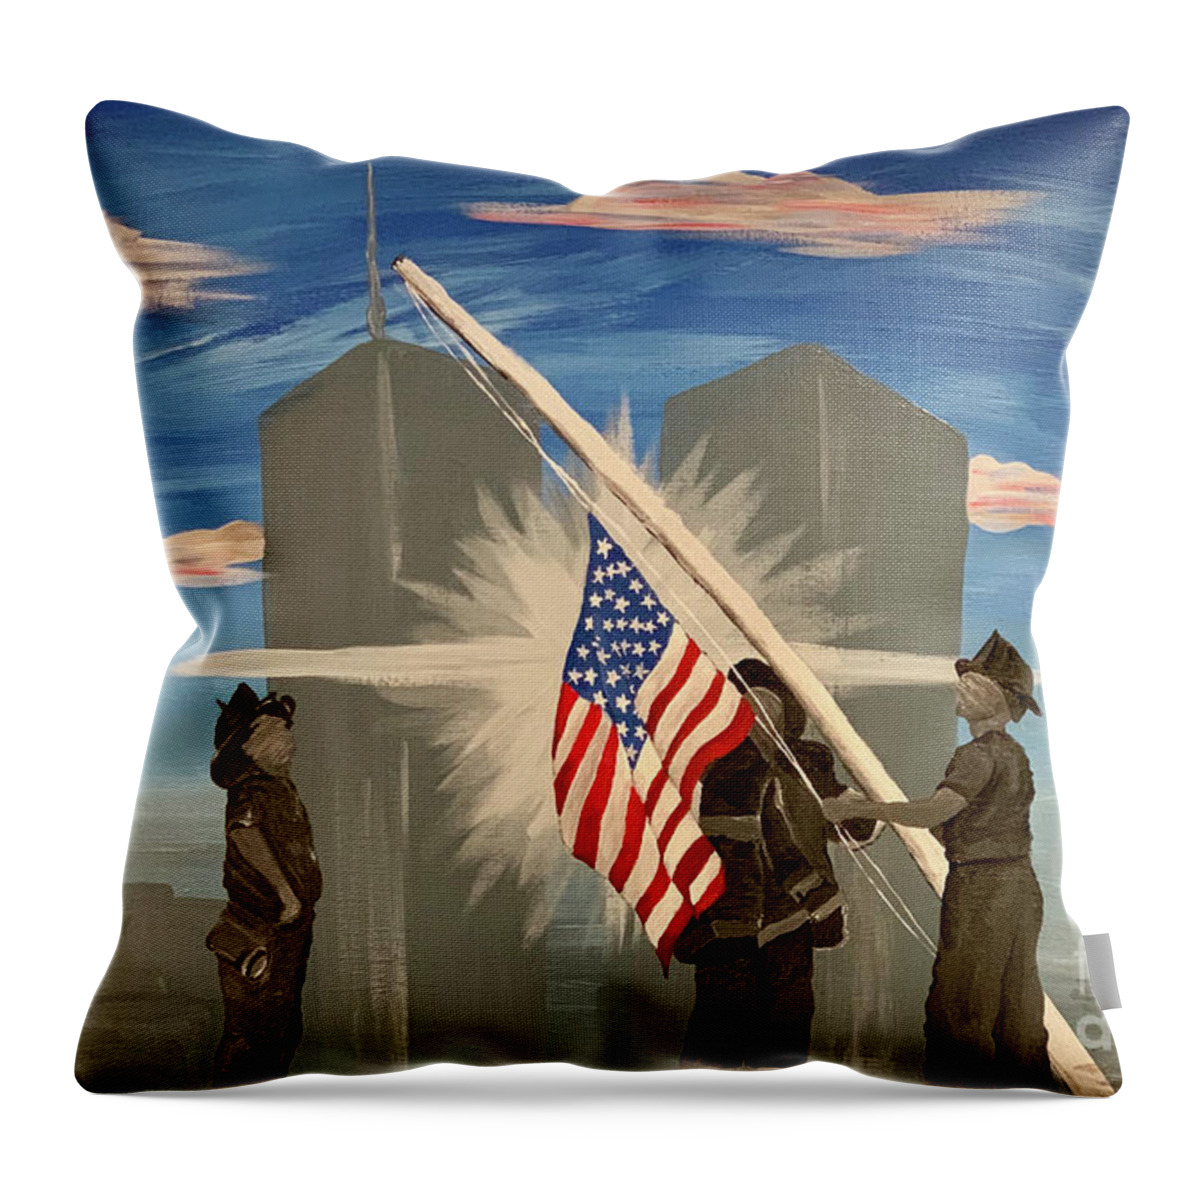 Twin Towers Throw Pillow featuring the painting Never Forget 9/11 by Deena Withycombe